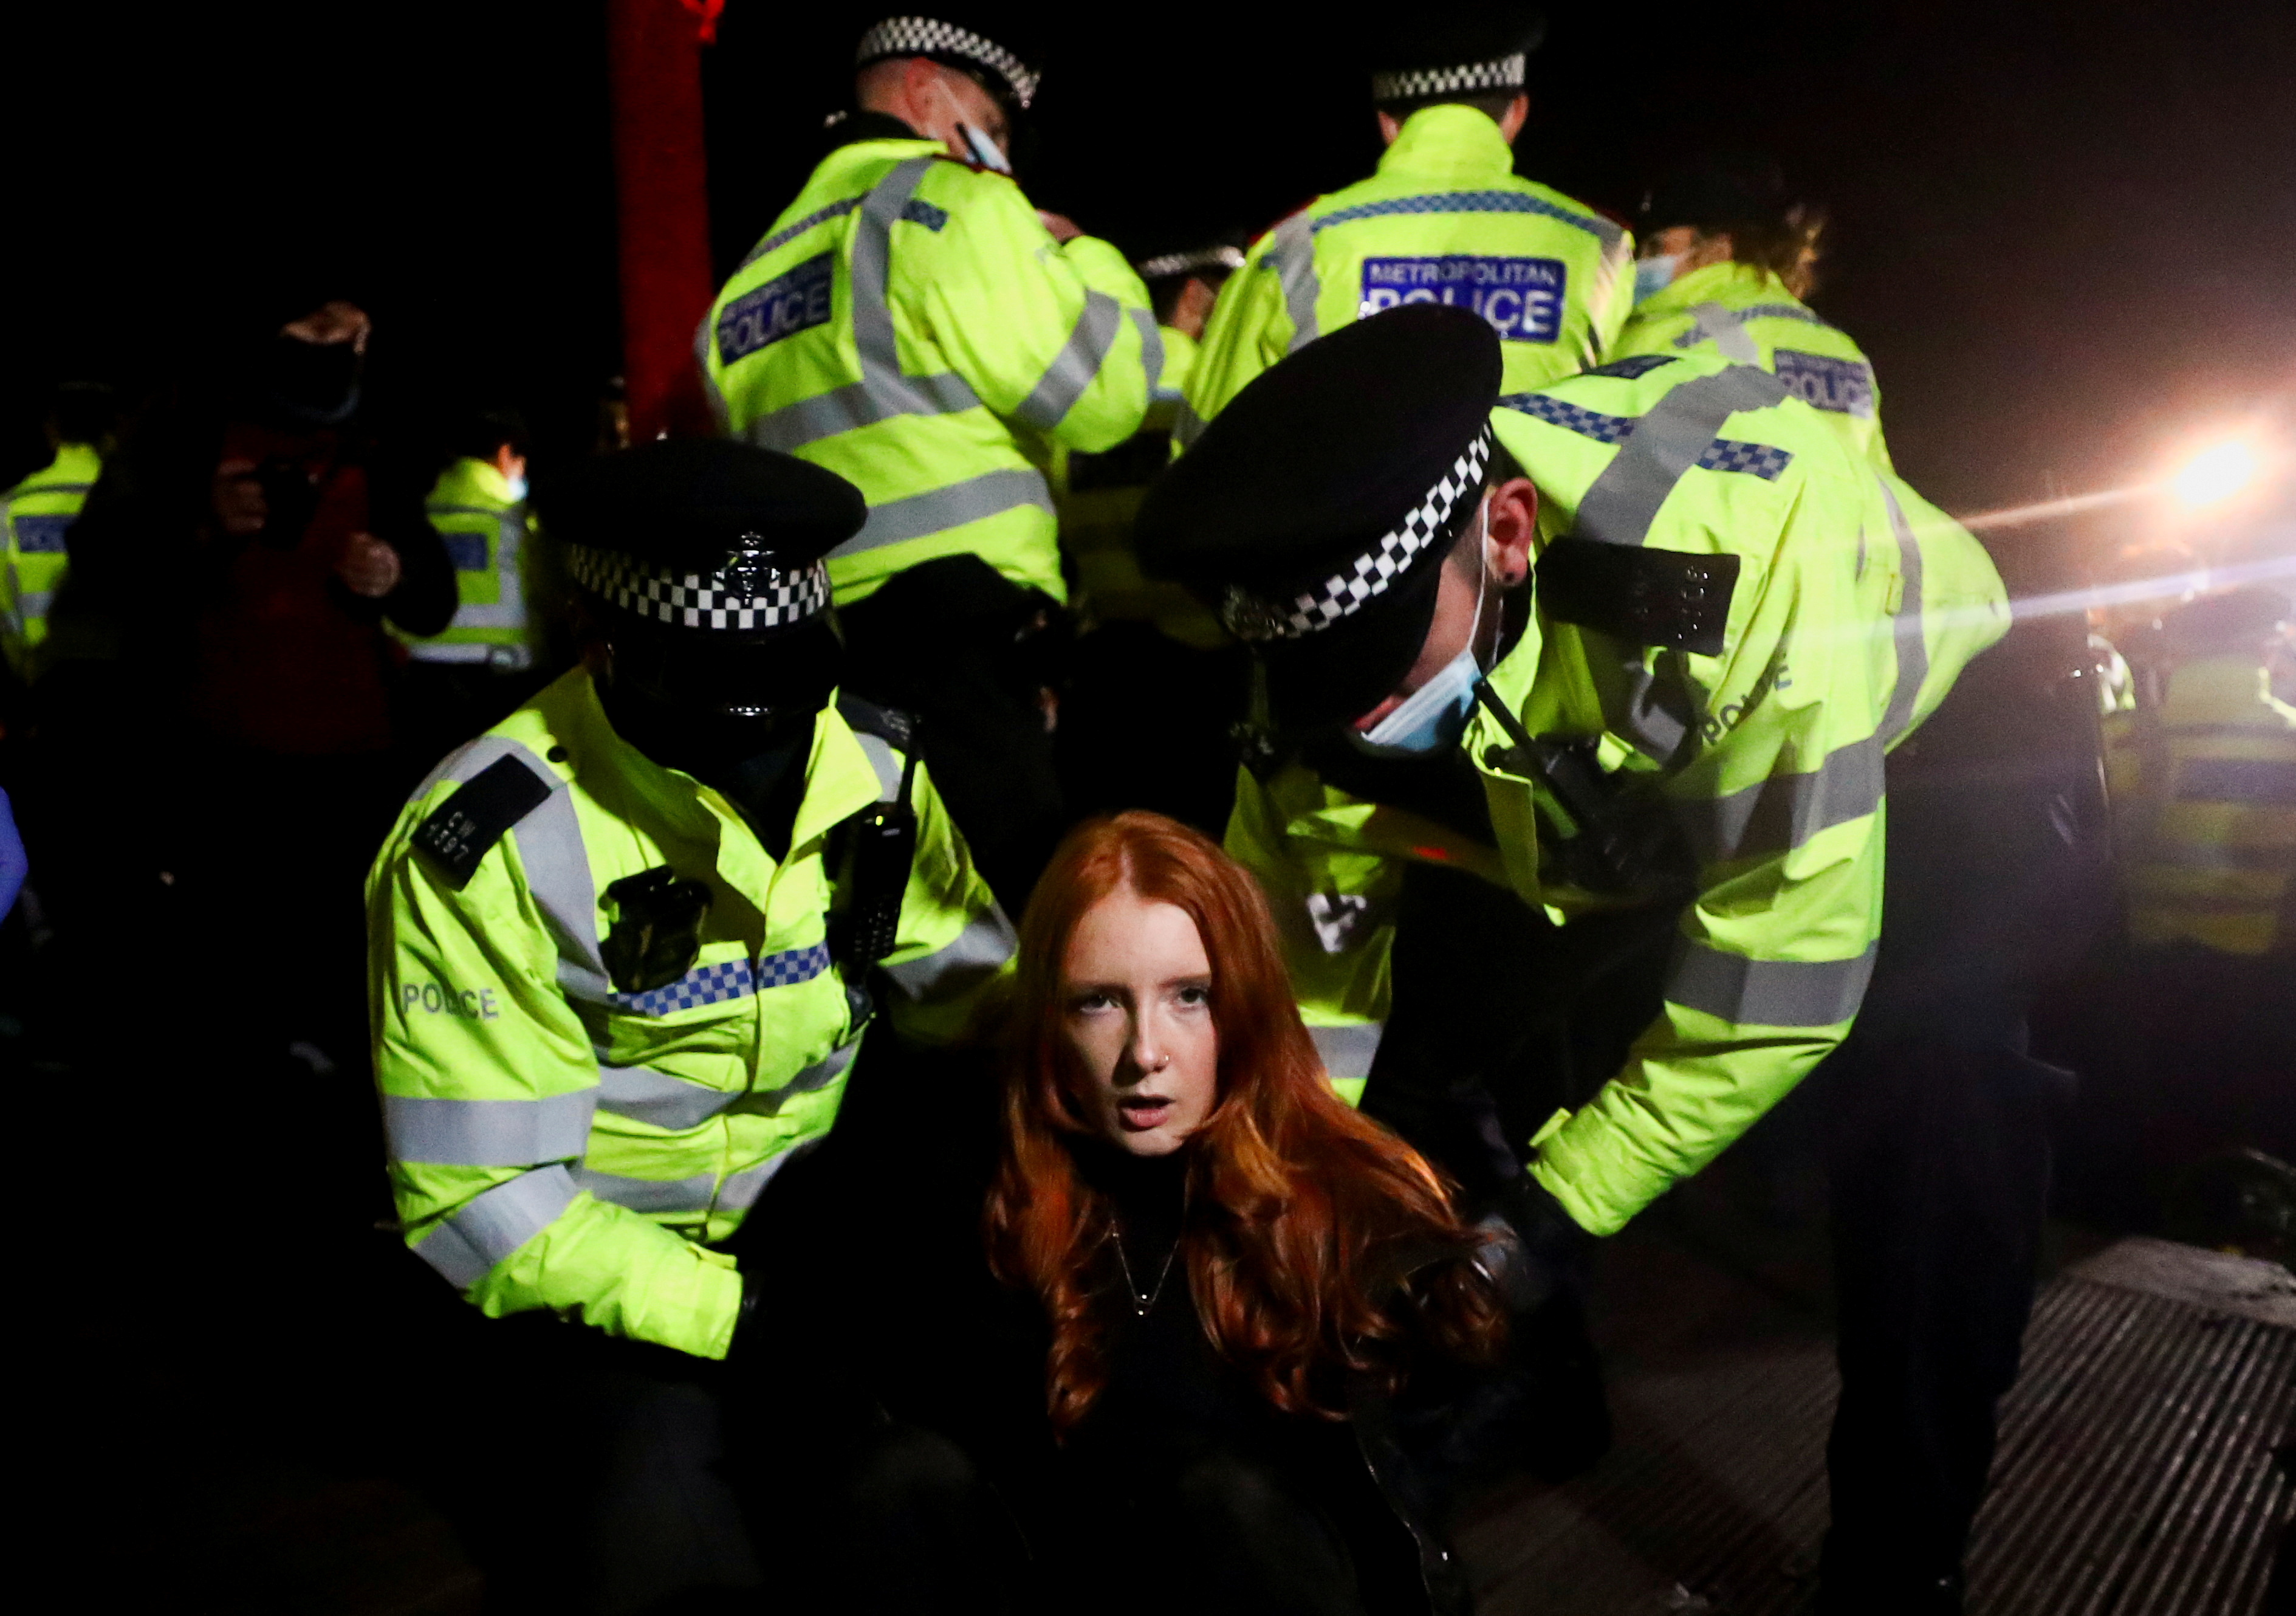 image UK police face backlash after dragging mourners from vigil for murdered woman (Update 2)